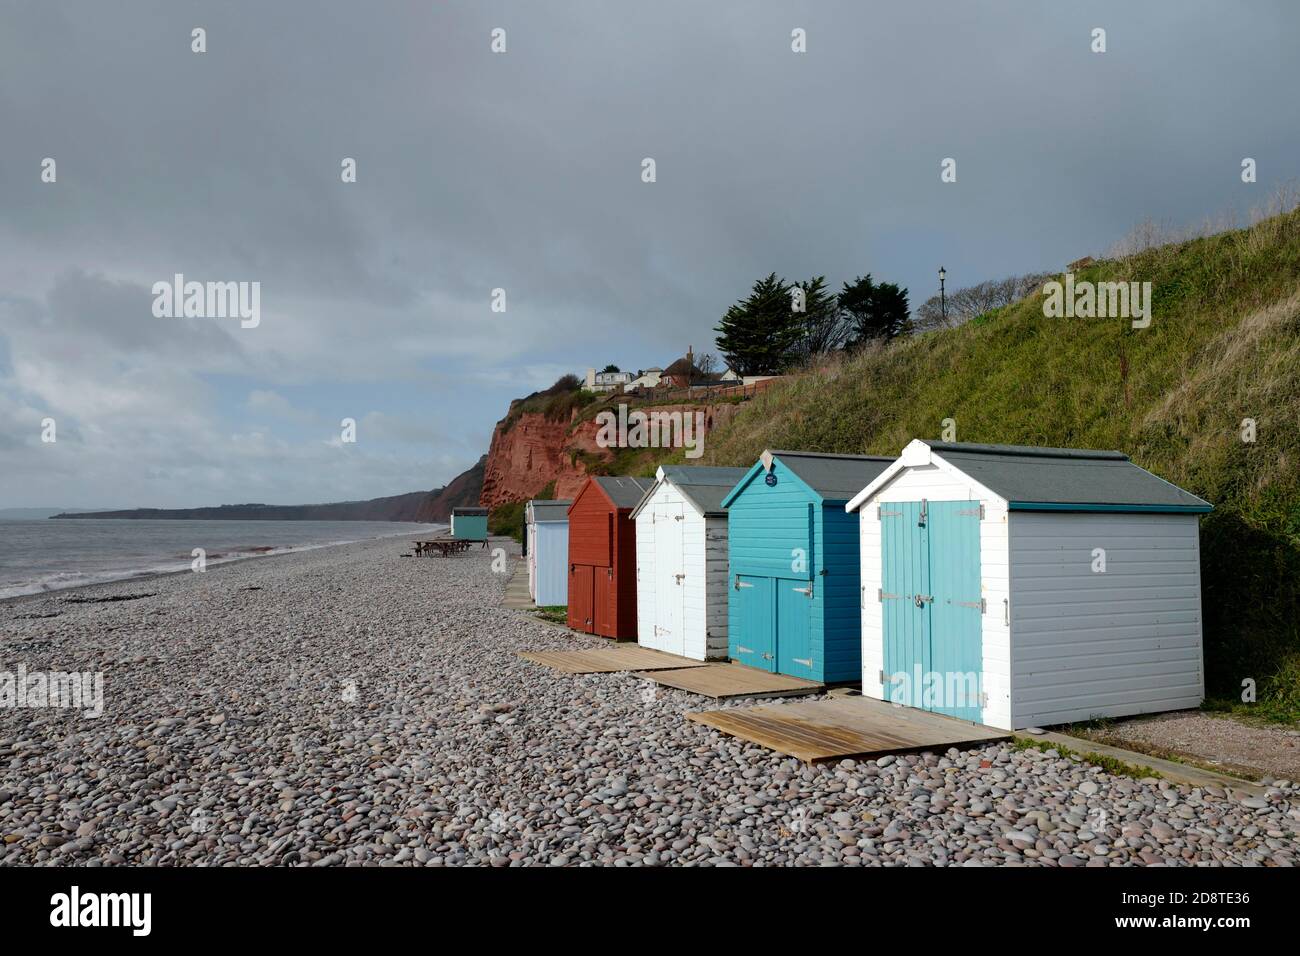 Beach Huts On A Stormy Day At Budleigh Salterton Devon Uk Stock Photo Alamy